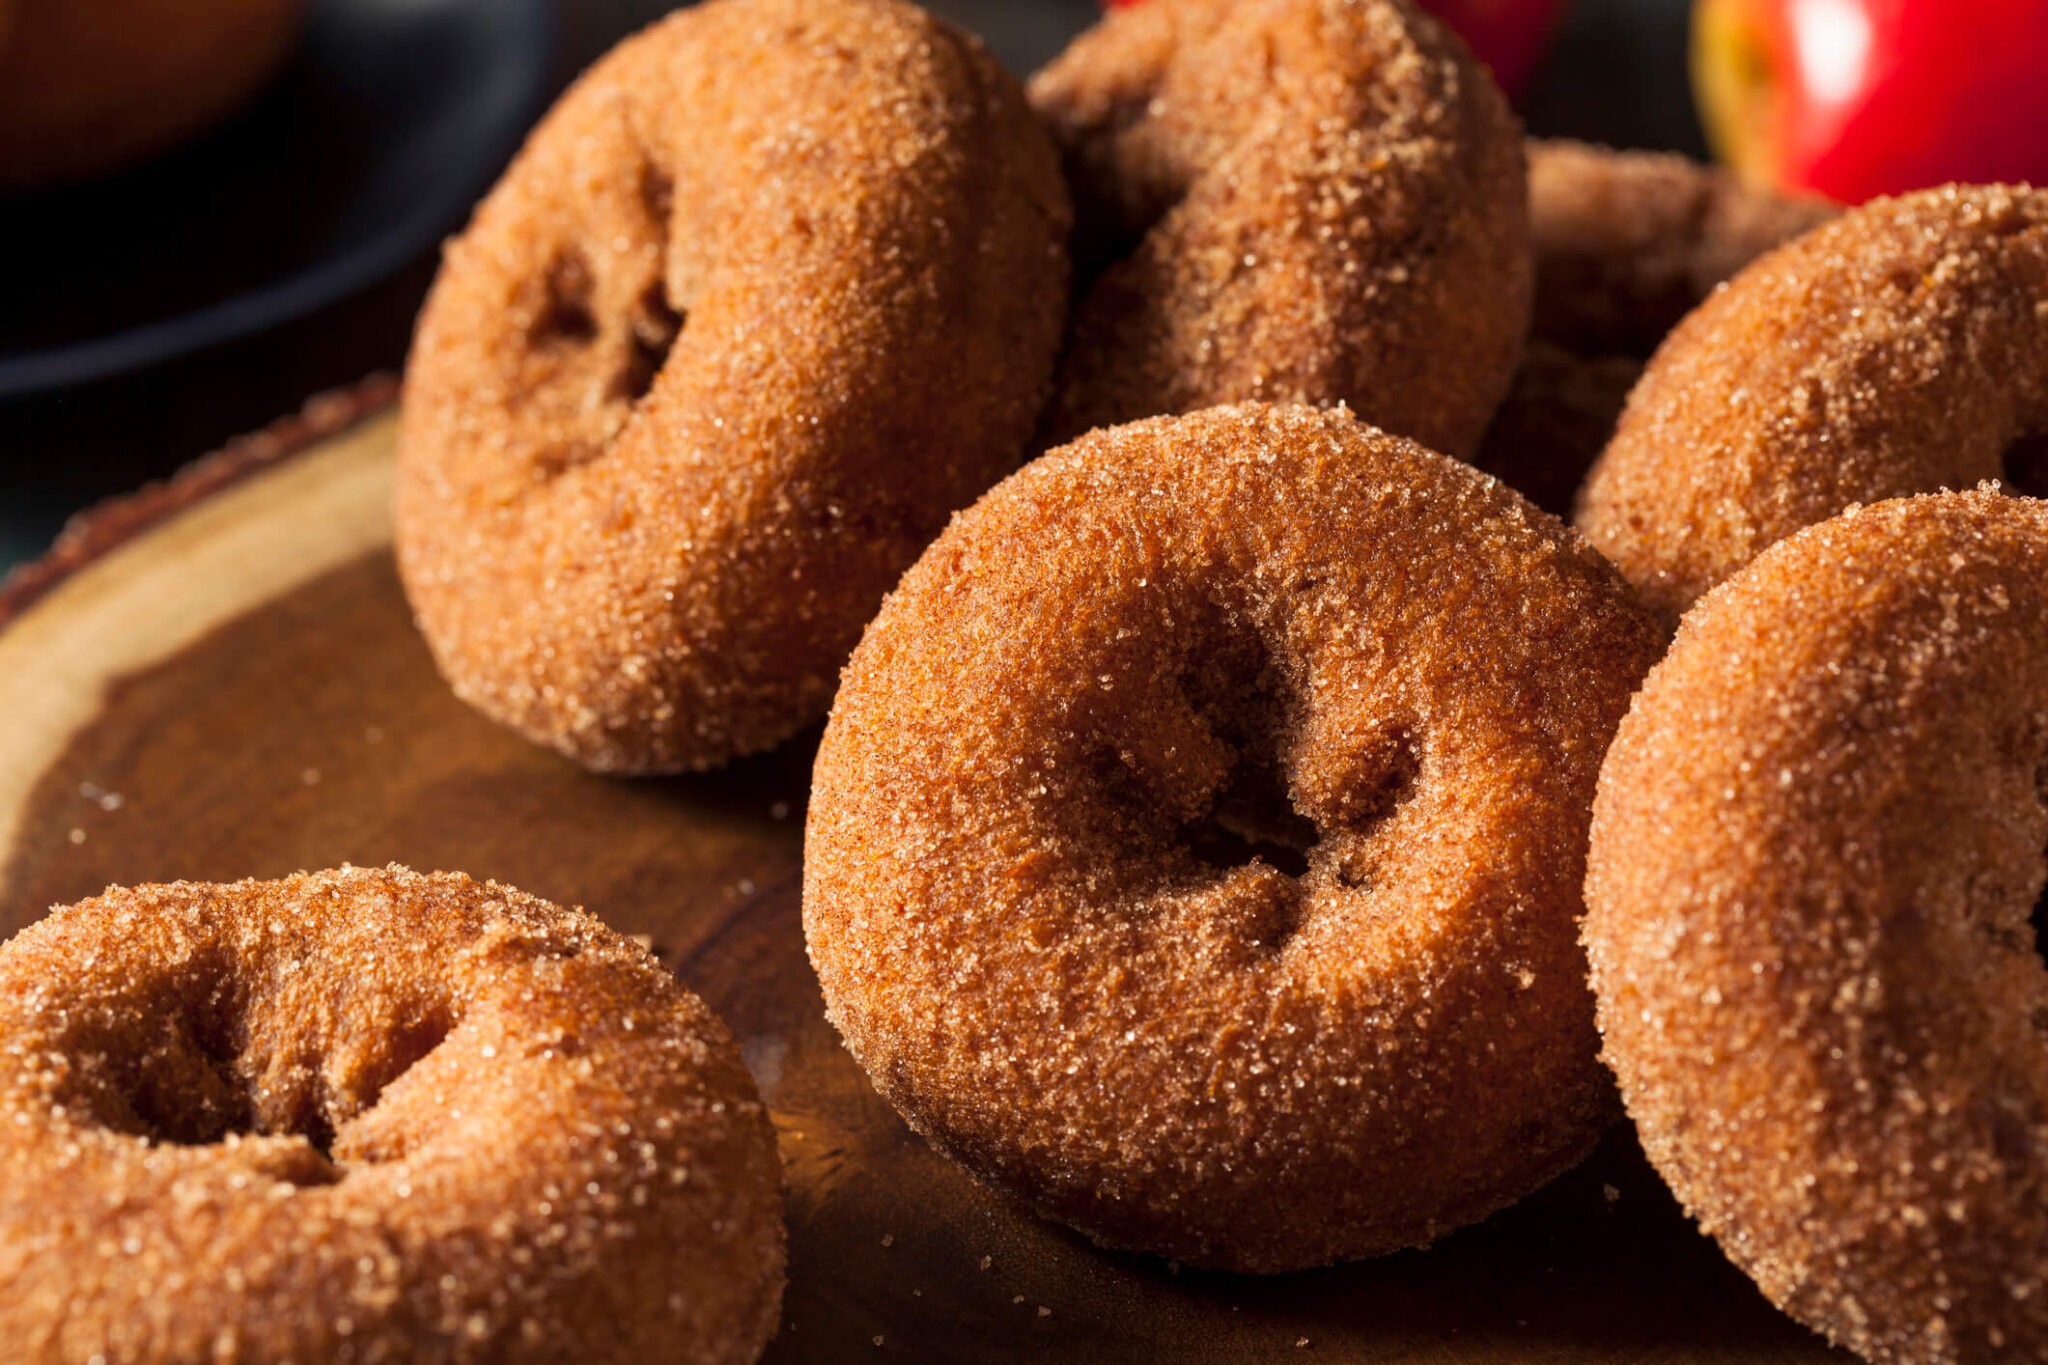 Apple cider doughnuts are one of the great pleasures of fall in the Hamptons